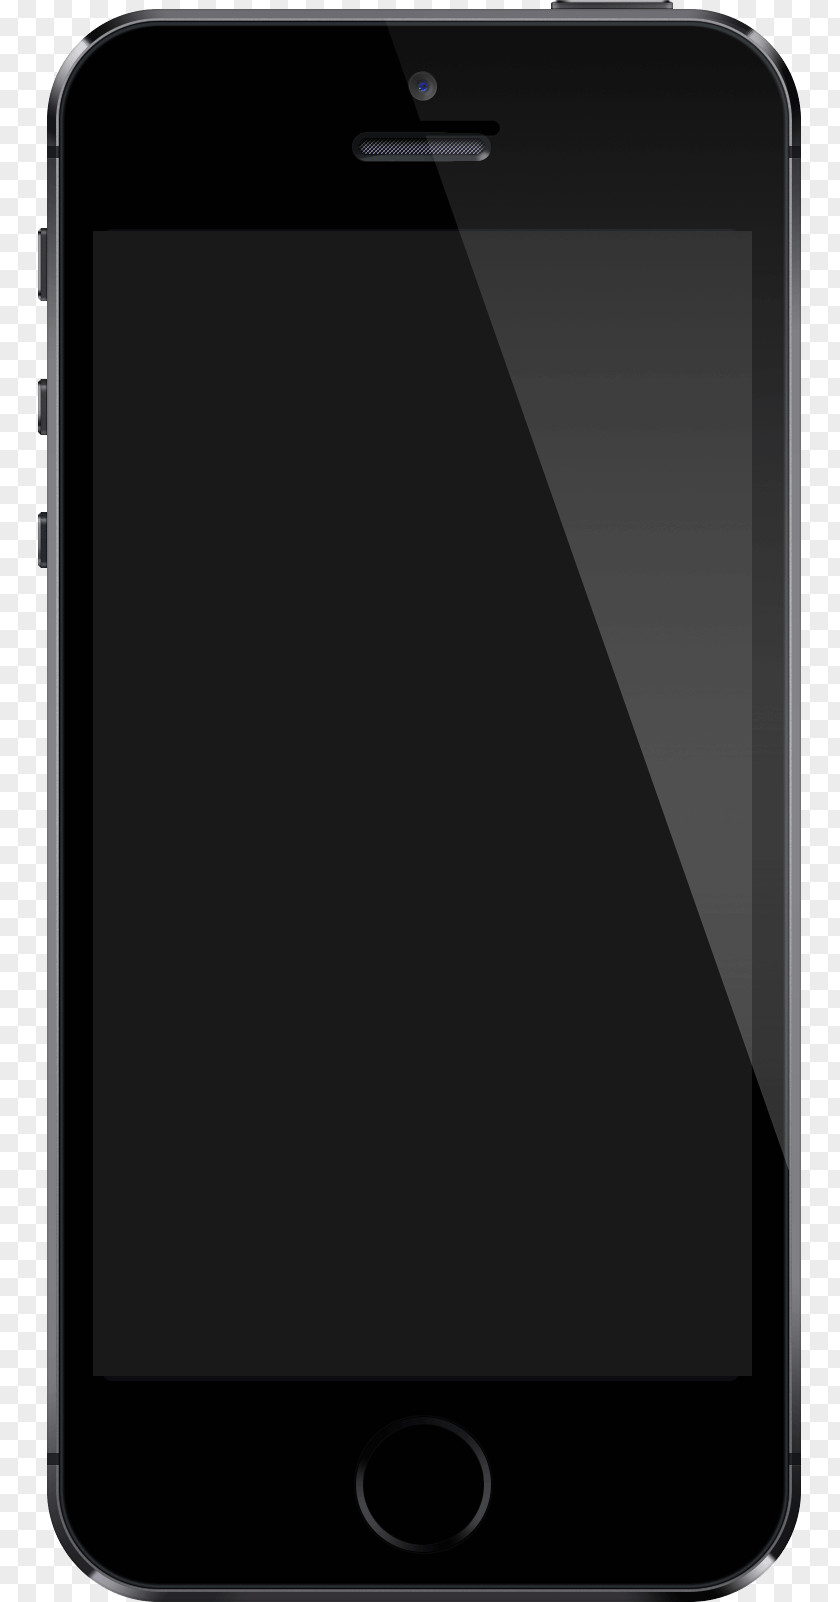 Apple Iphone Image IPhone 4S 6 5 3GS PNG